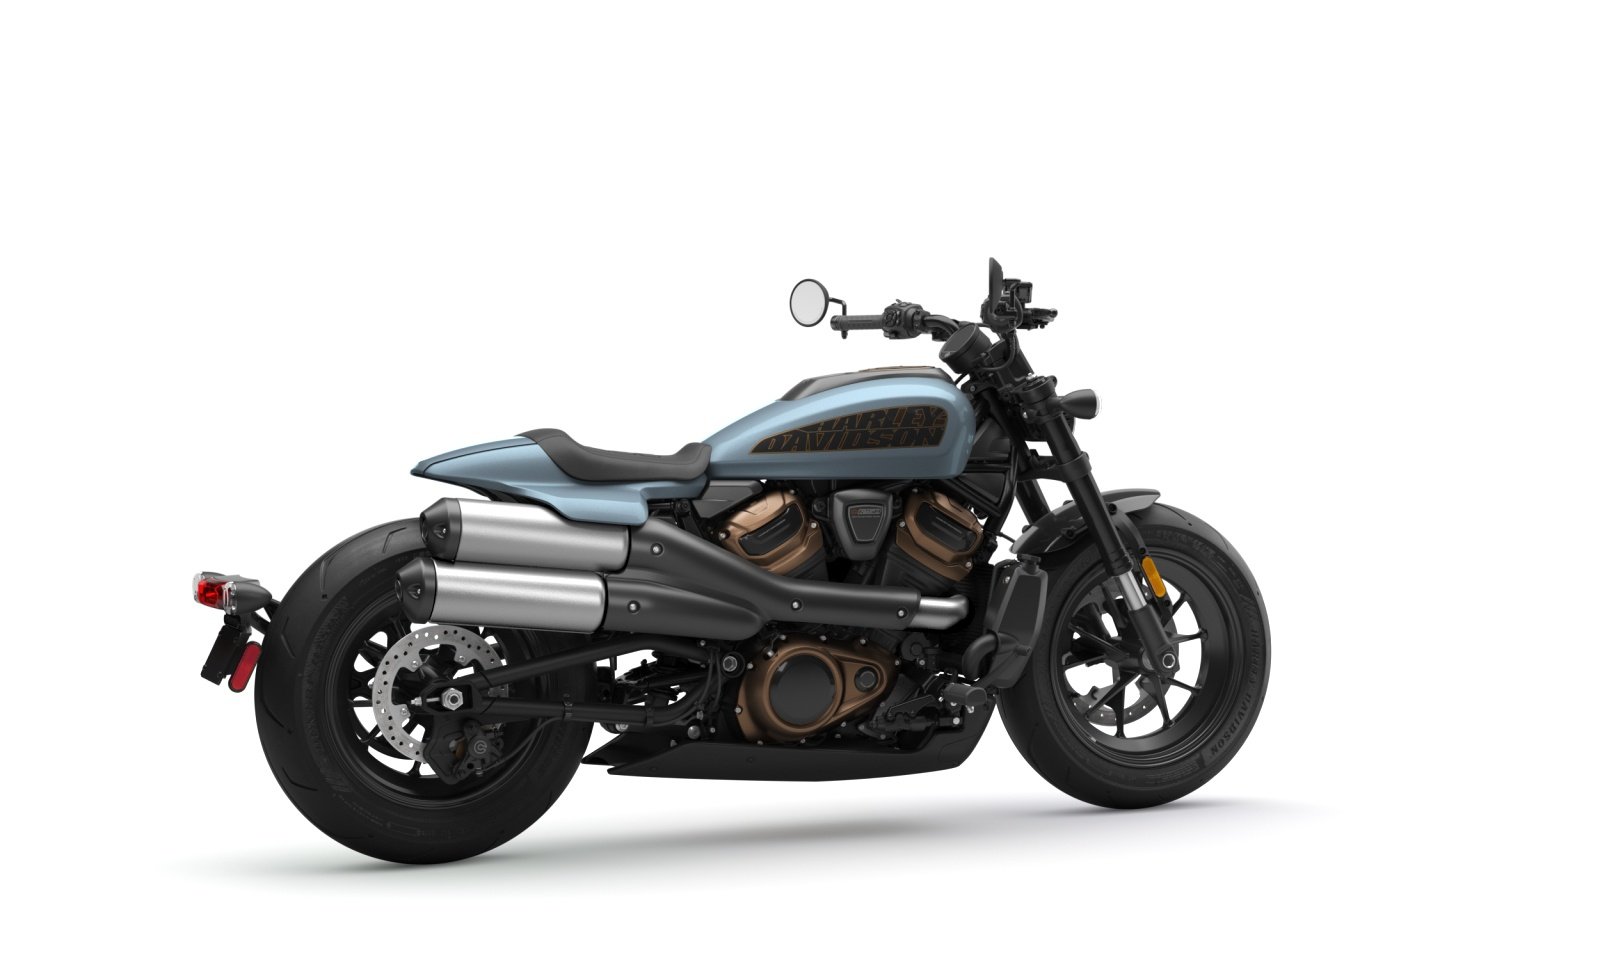 The new Harley-Davidson Sportster S: style and substance